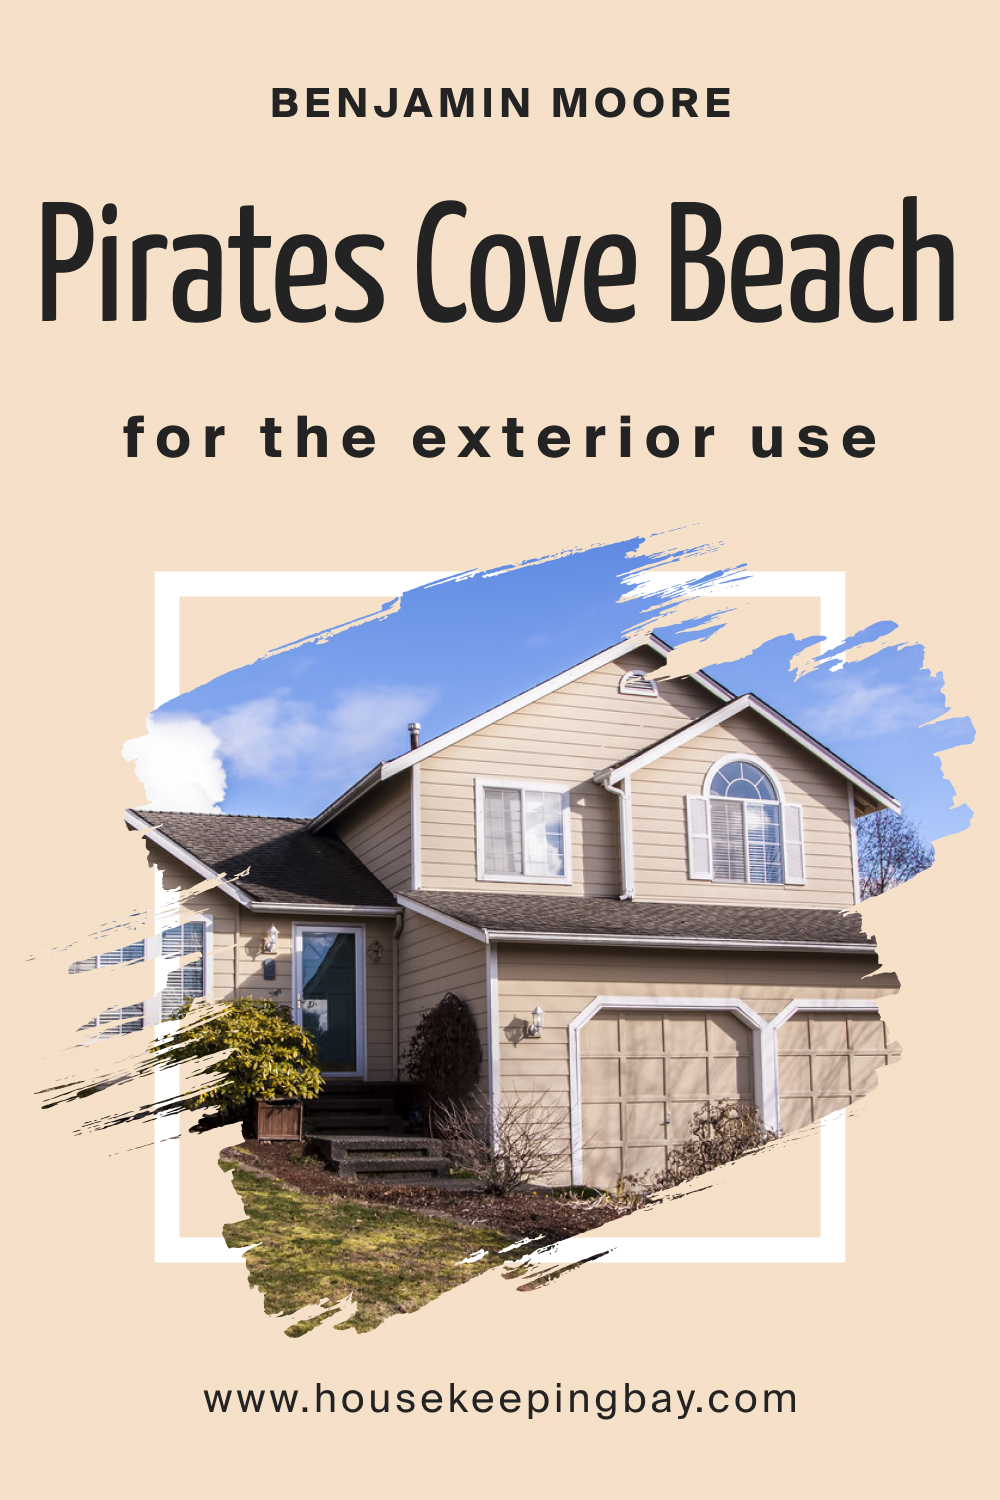 Benjamin Moore. Pirates Cove Beach OC 80 for the Exterior Use